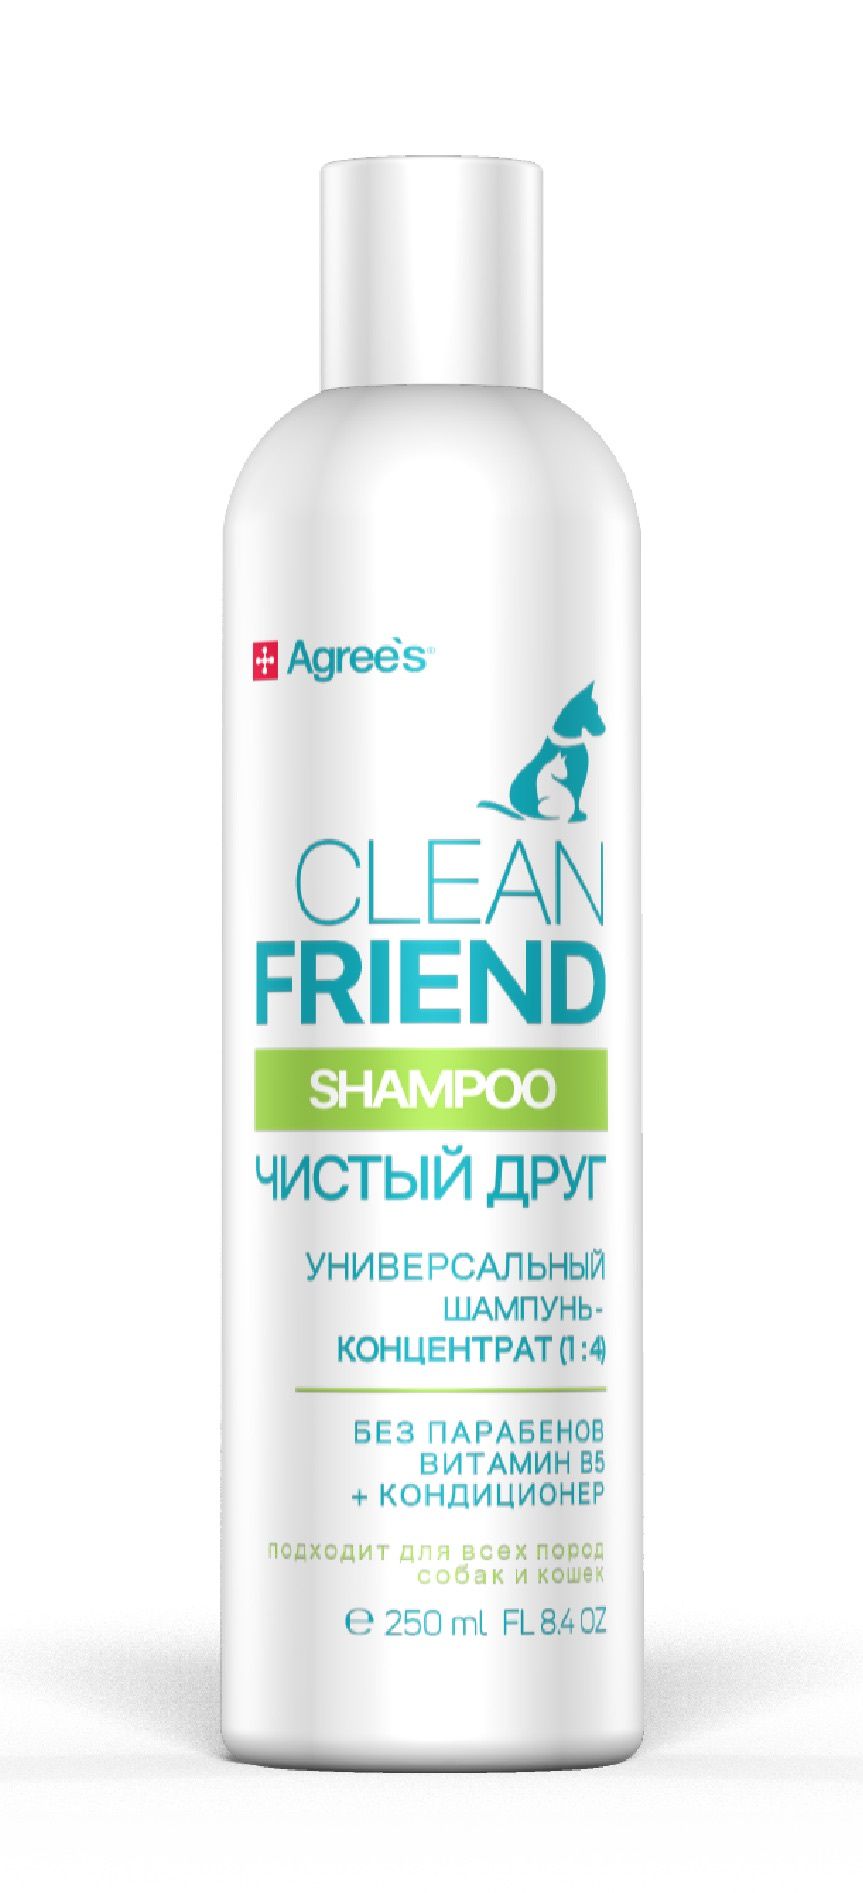    Agree's for pets Clean friend,    , c  5 203